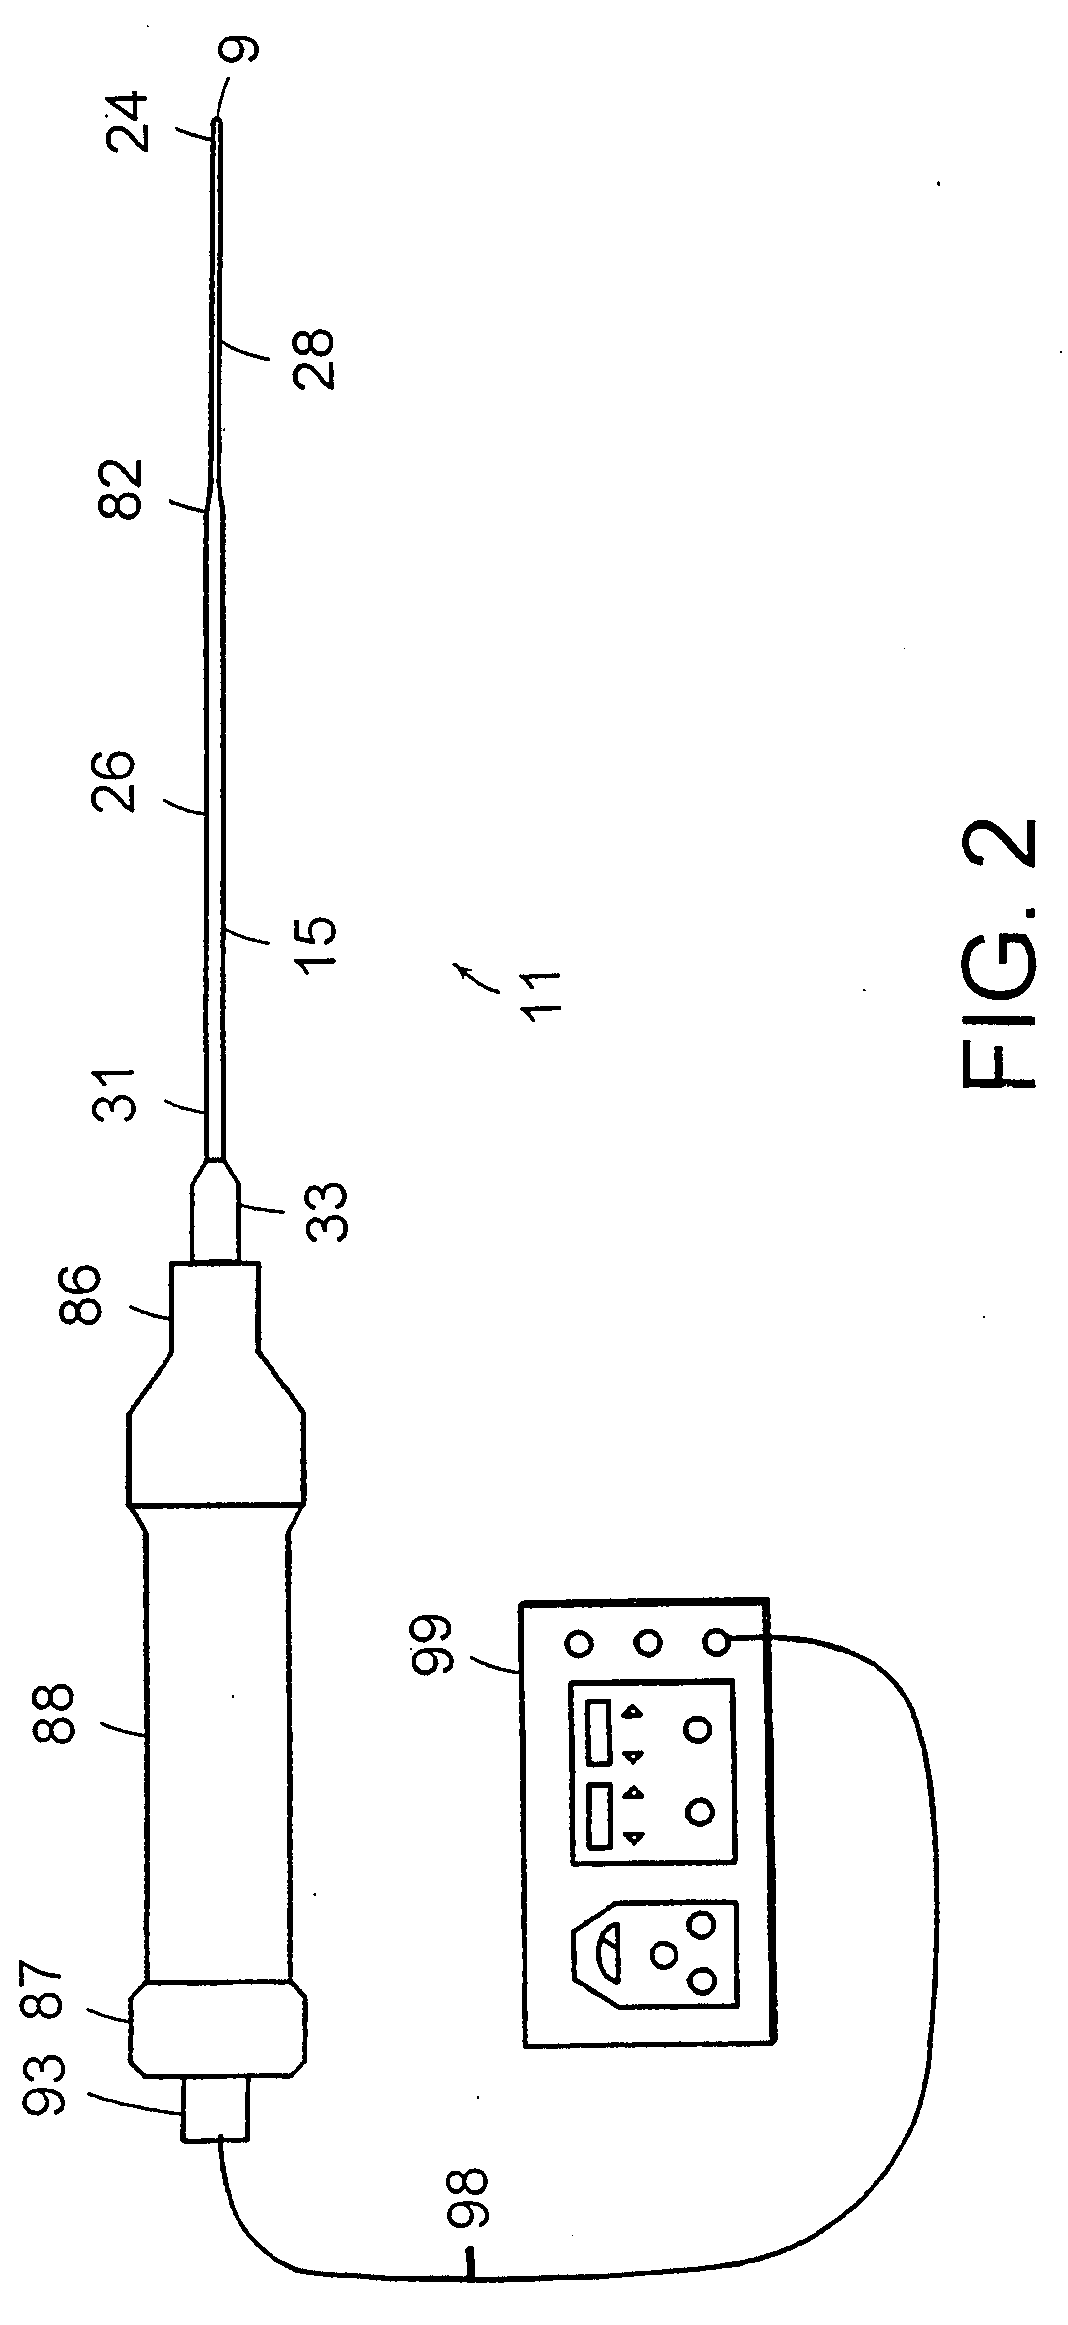 Apparatus and method for an ultrasonic medical device with variable frequency drive